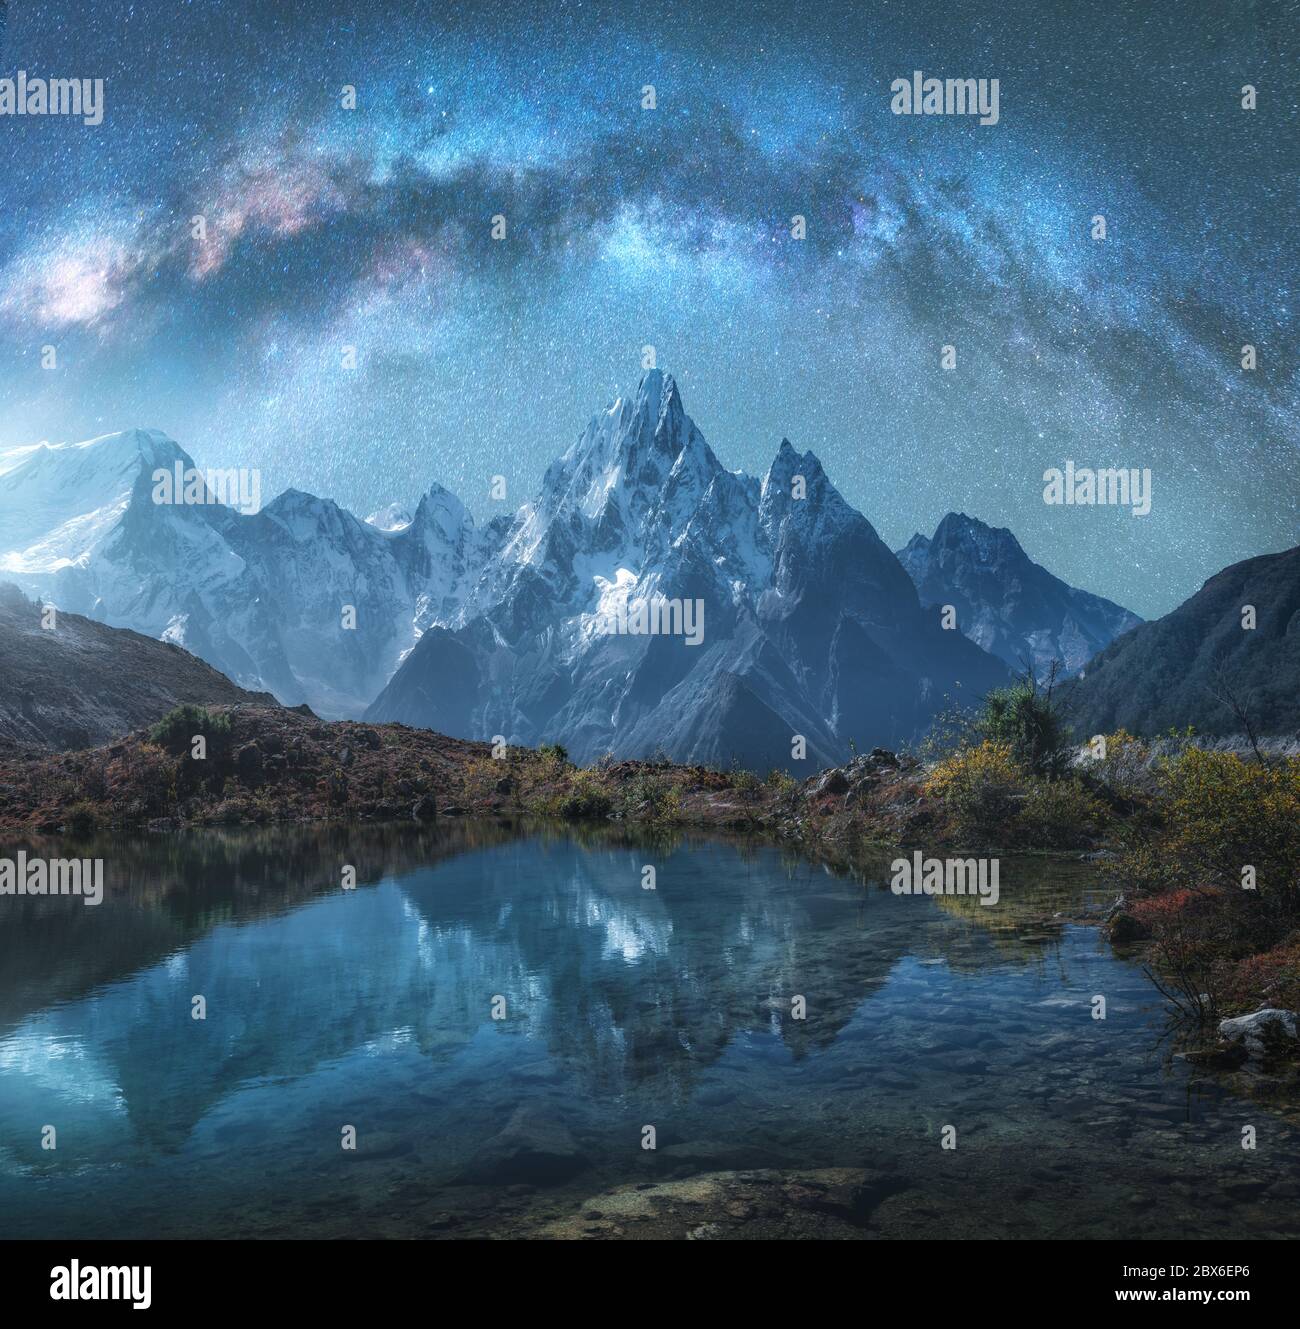 Milky Way over snowy mountains and lake at night. Landscape Stock Photo